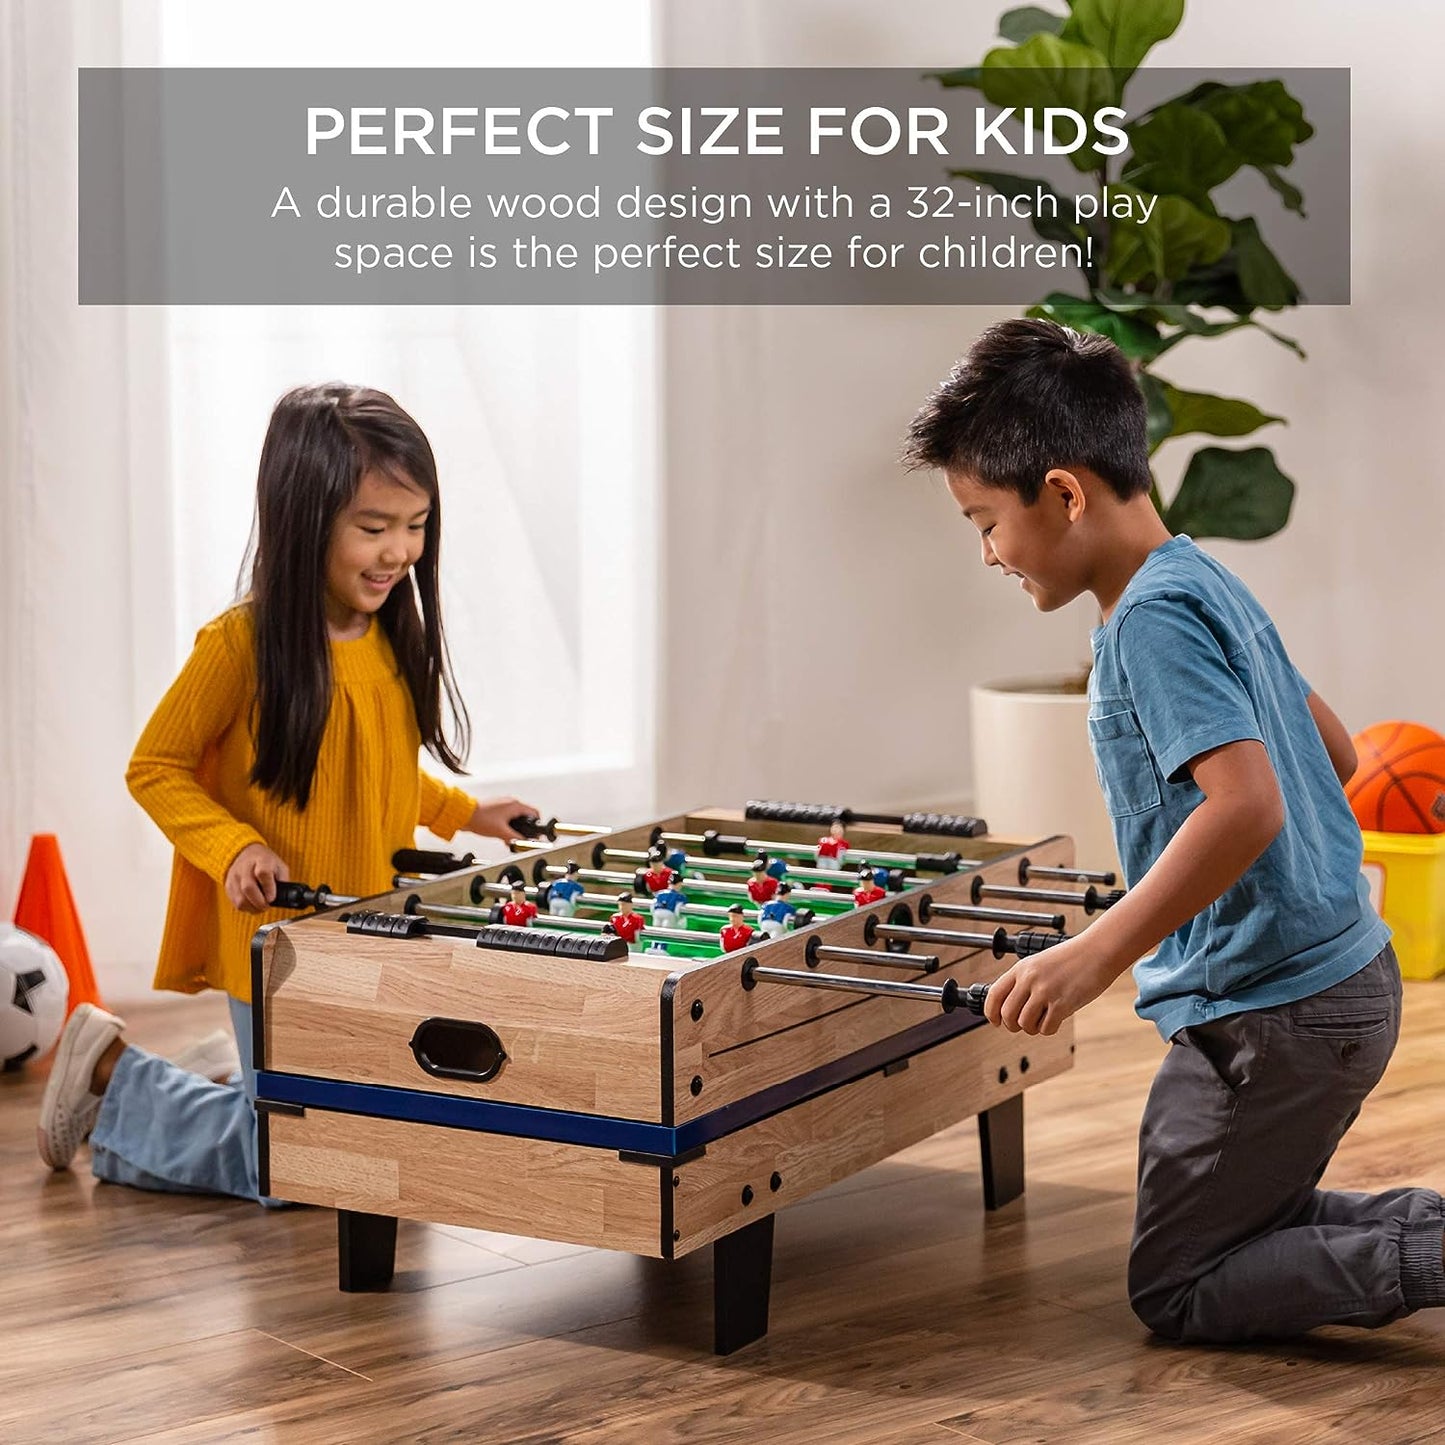 4-In-1 Multi Game Table, Childrens Combination Arcade Set for Home, Play Room, Rec Room W/Pool Billiards, Air Hockey, Foosball and Table Tennis